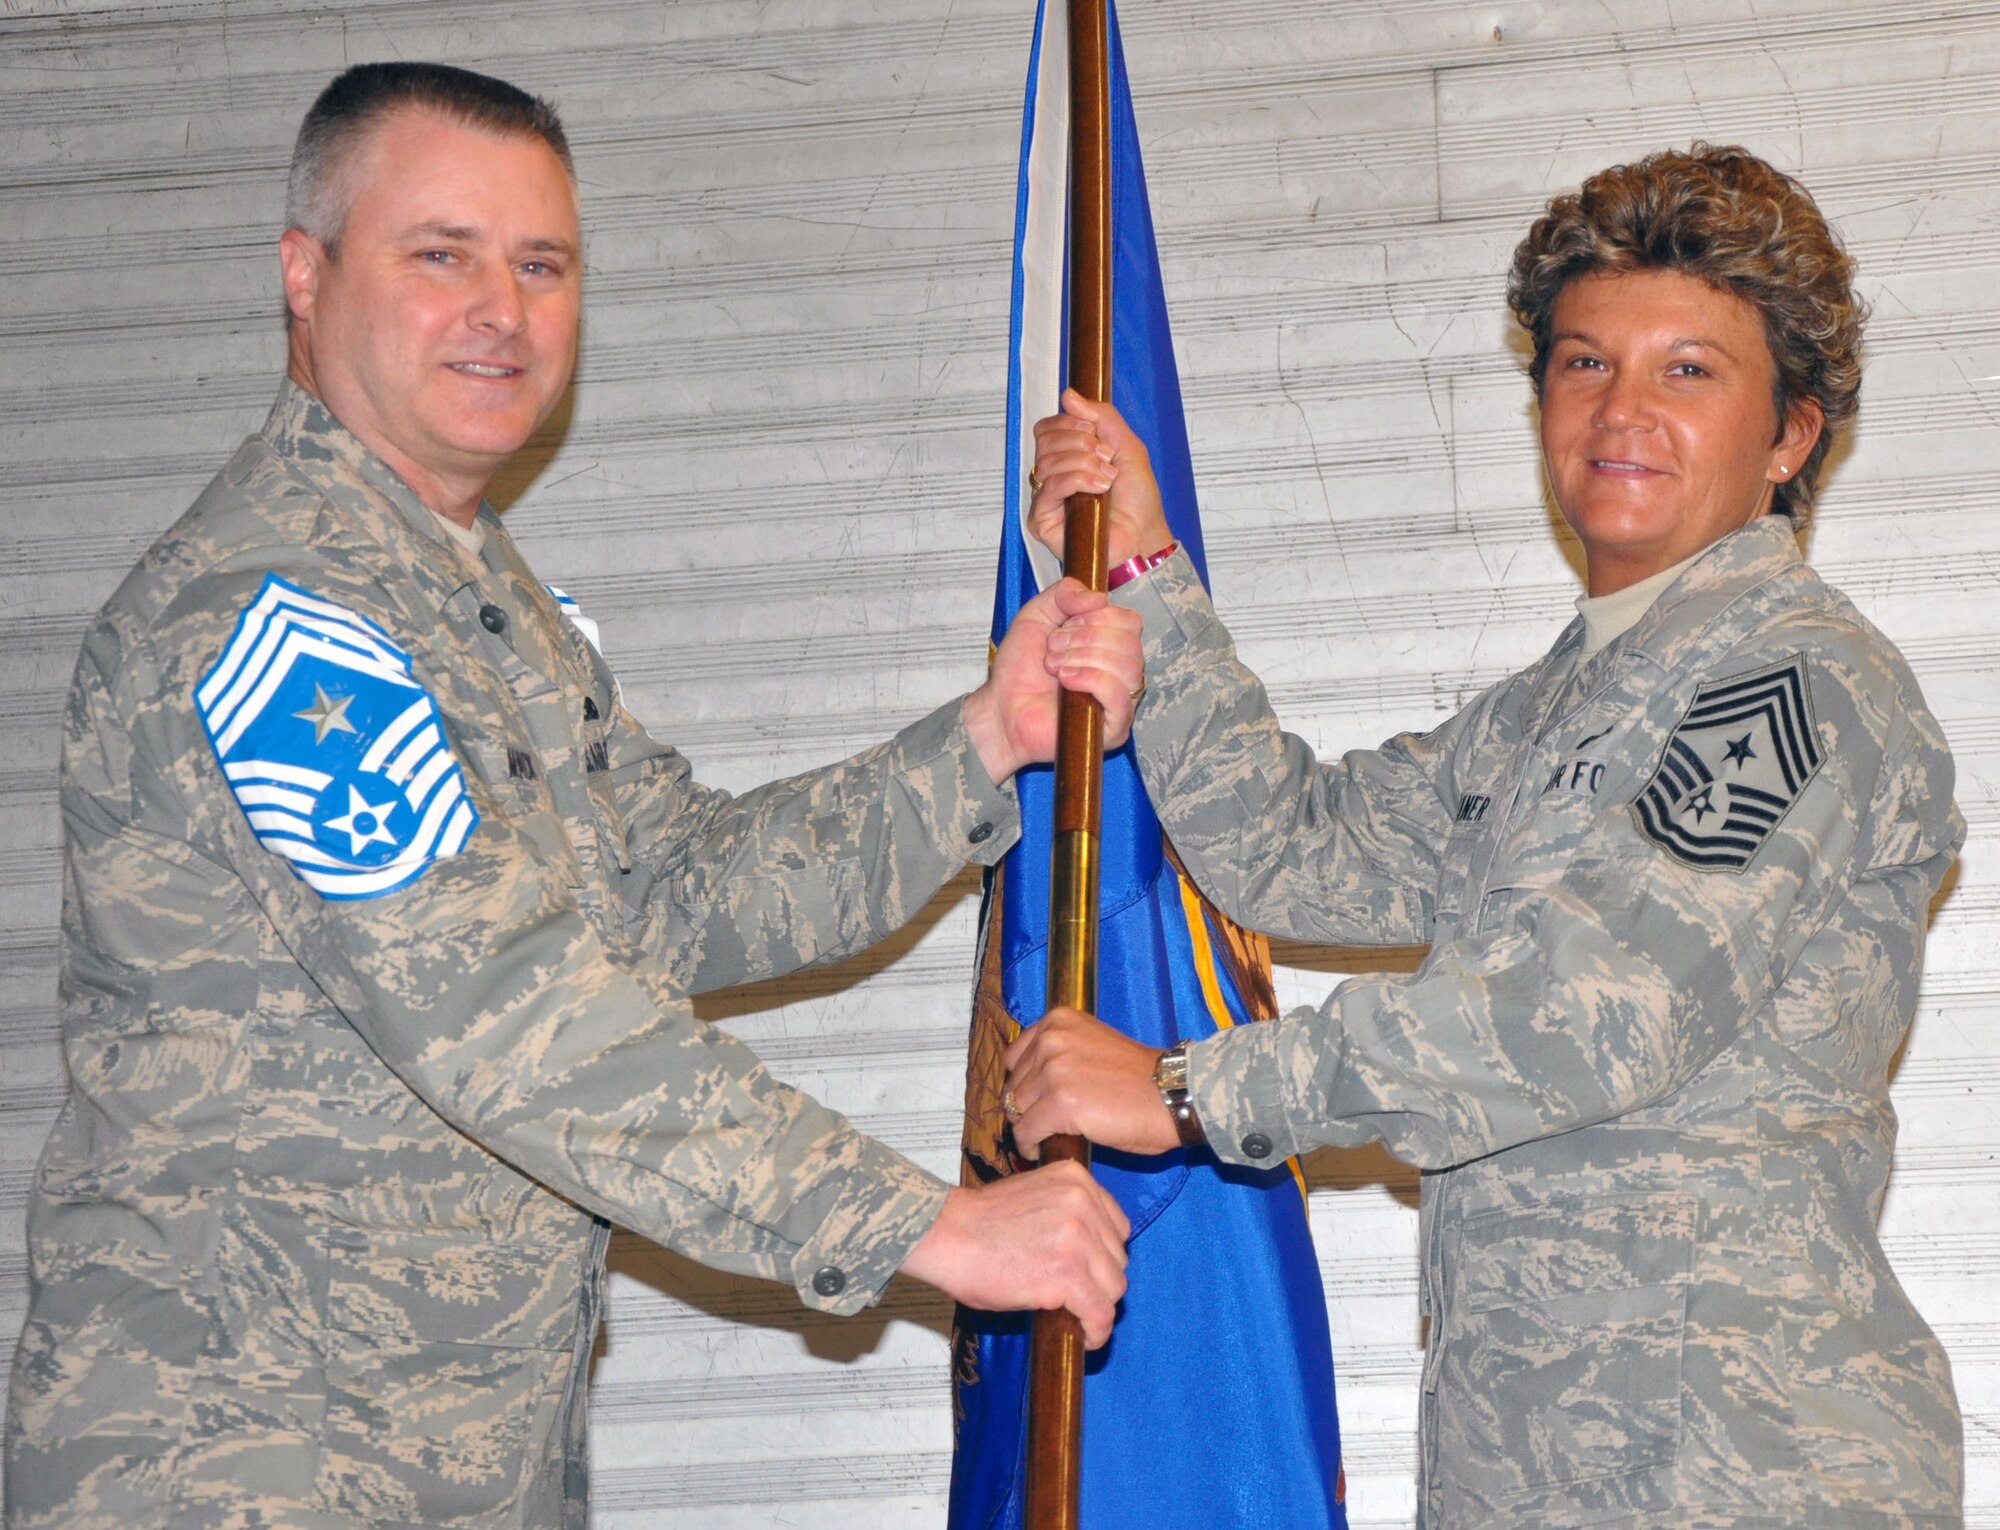 MCCHORD FIELD, Wash. - Chief Master Sgt. Anthony Mack, 446th Airlift Wing command chief presents a chief's flag to Chief Master Sgt. Kathleen Buckner, Air Force Reserve Command, command chief, during the 446th AW commander's call here.  Mack received his stripe and was appointed to 446th AW command chief during the ceremony April 1 at Hangar 9.  (U.S. Air Force photo by Tech. Sgt. Eizabeth Moody)